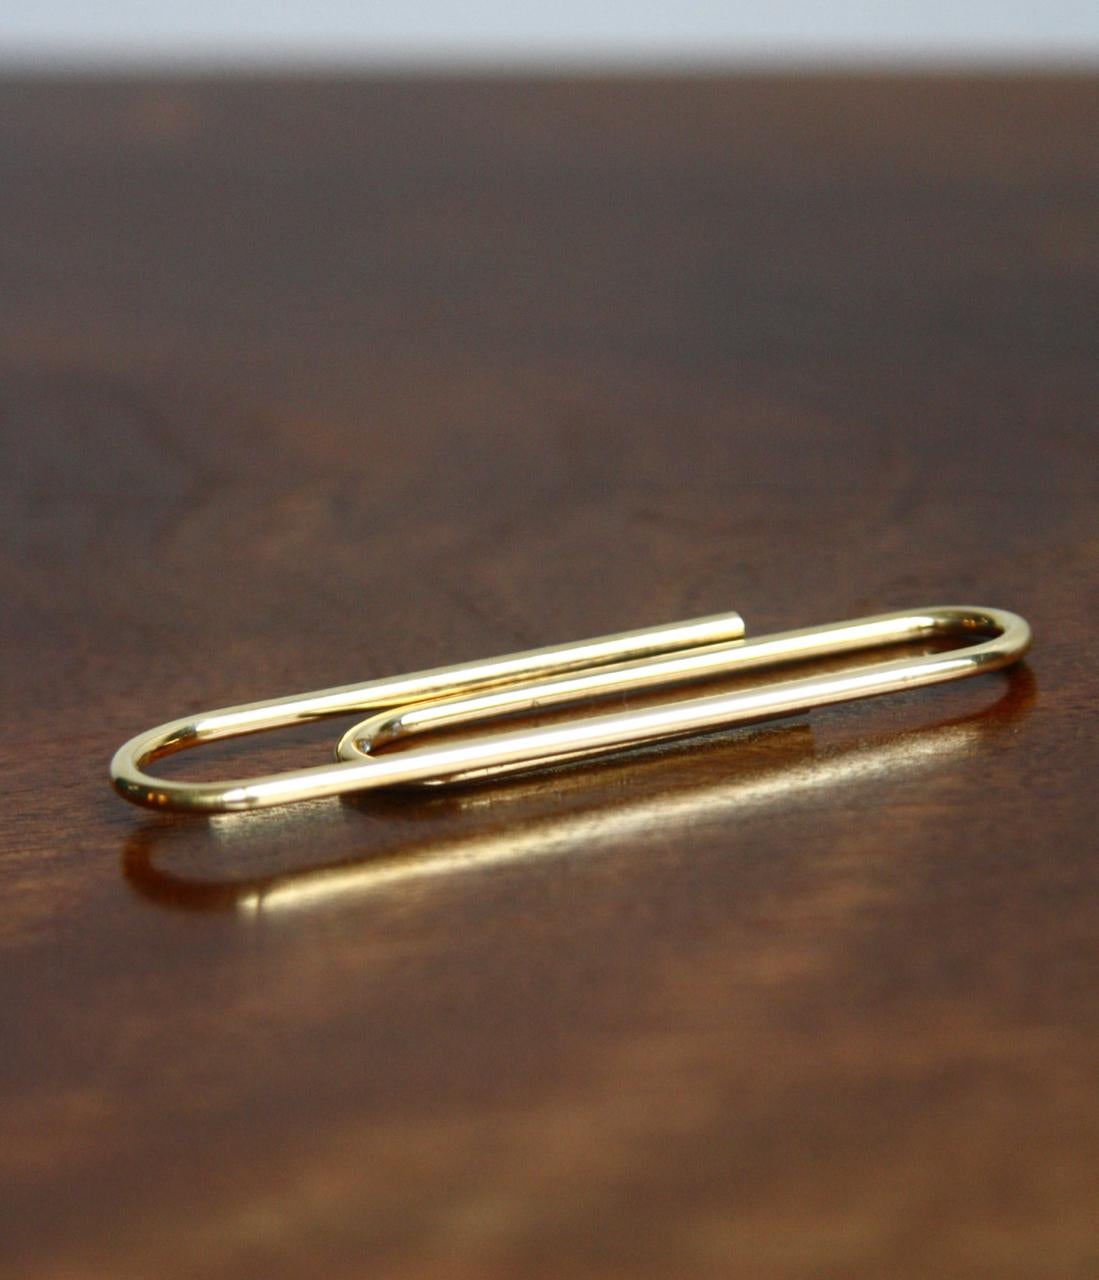 Description:
A small solid, polished brass paper clip designed by Auböck II circa 1950 but made today by Carl Auböck IV. Designed to keep documents in order, the clip is formed of a continuous thick gauge brass wire. Stamped with the Auböck